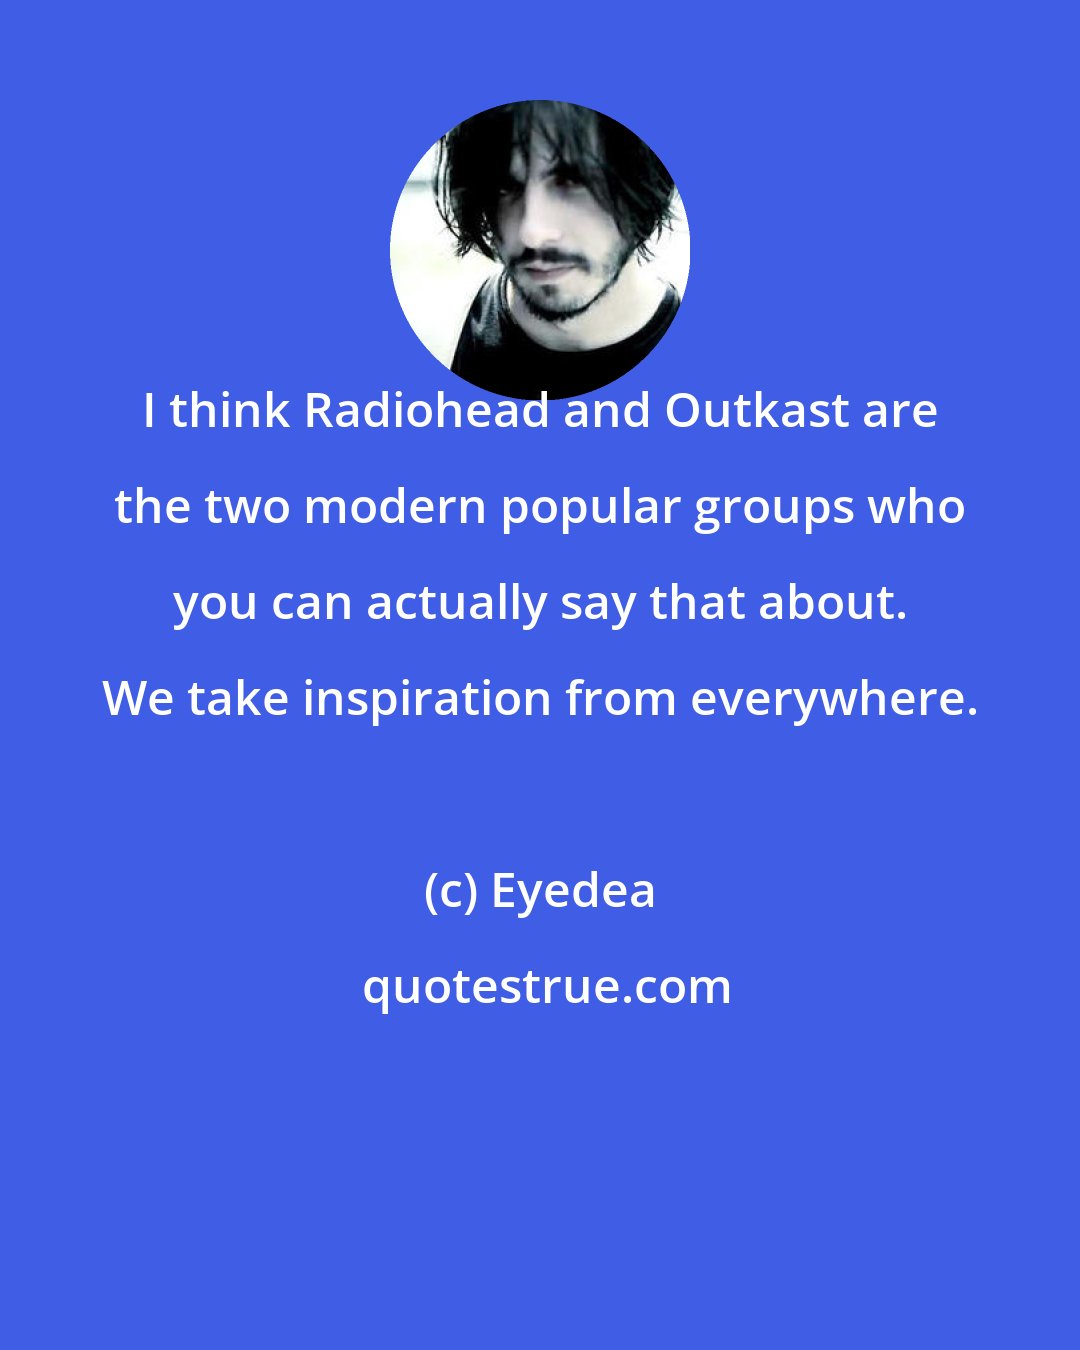 Eyedea: I think Radiohead and Outkast are the two modern popular groups who you can actually say that about. We take inspiration from everywhere.